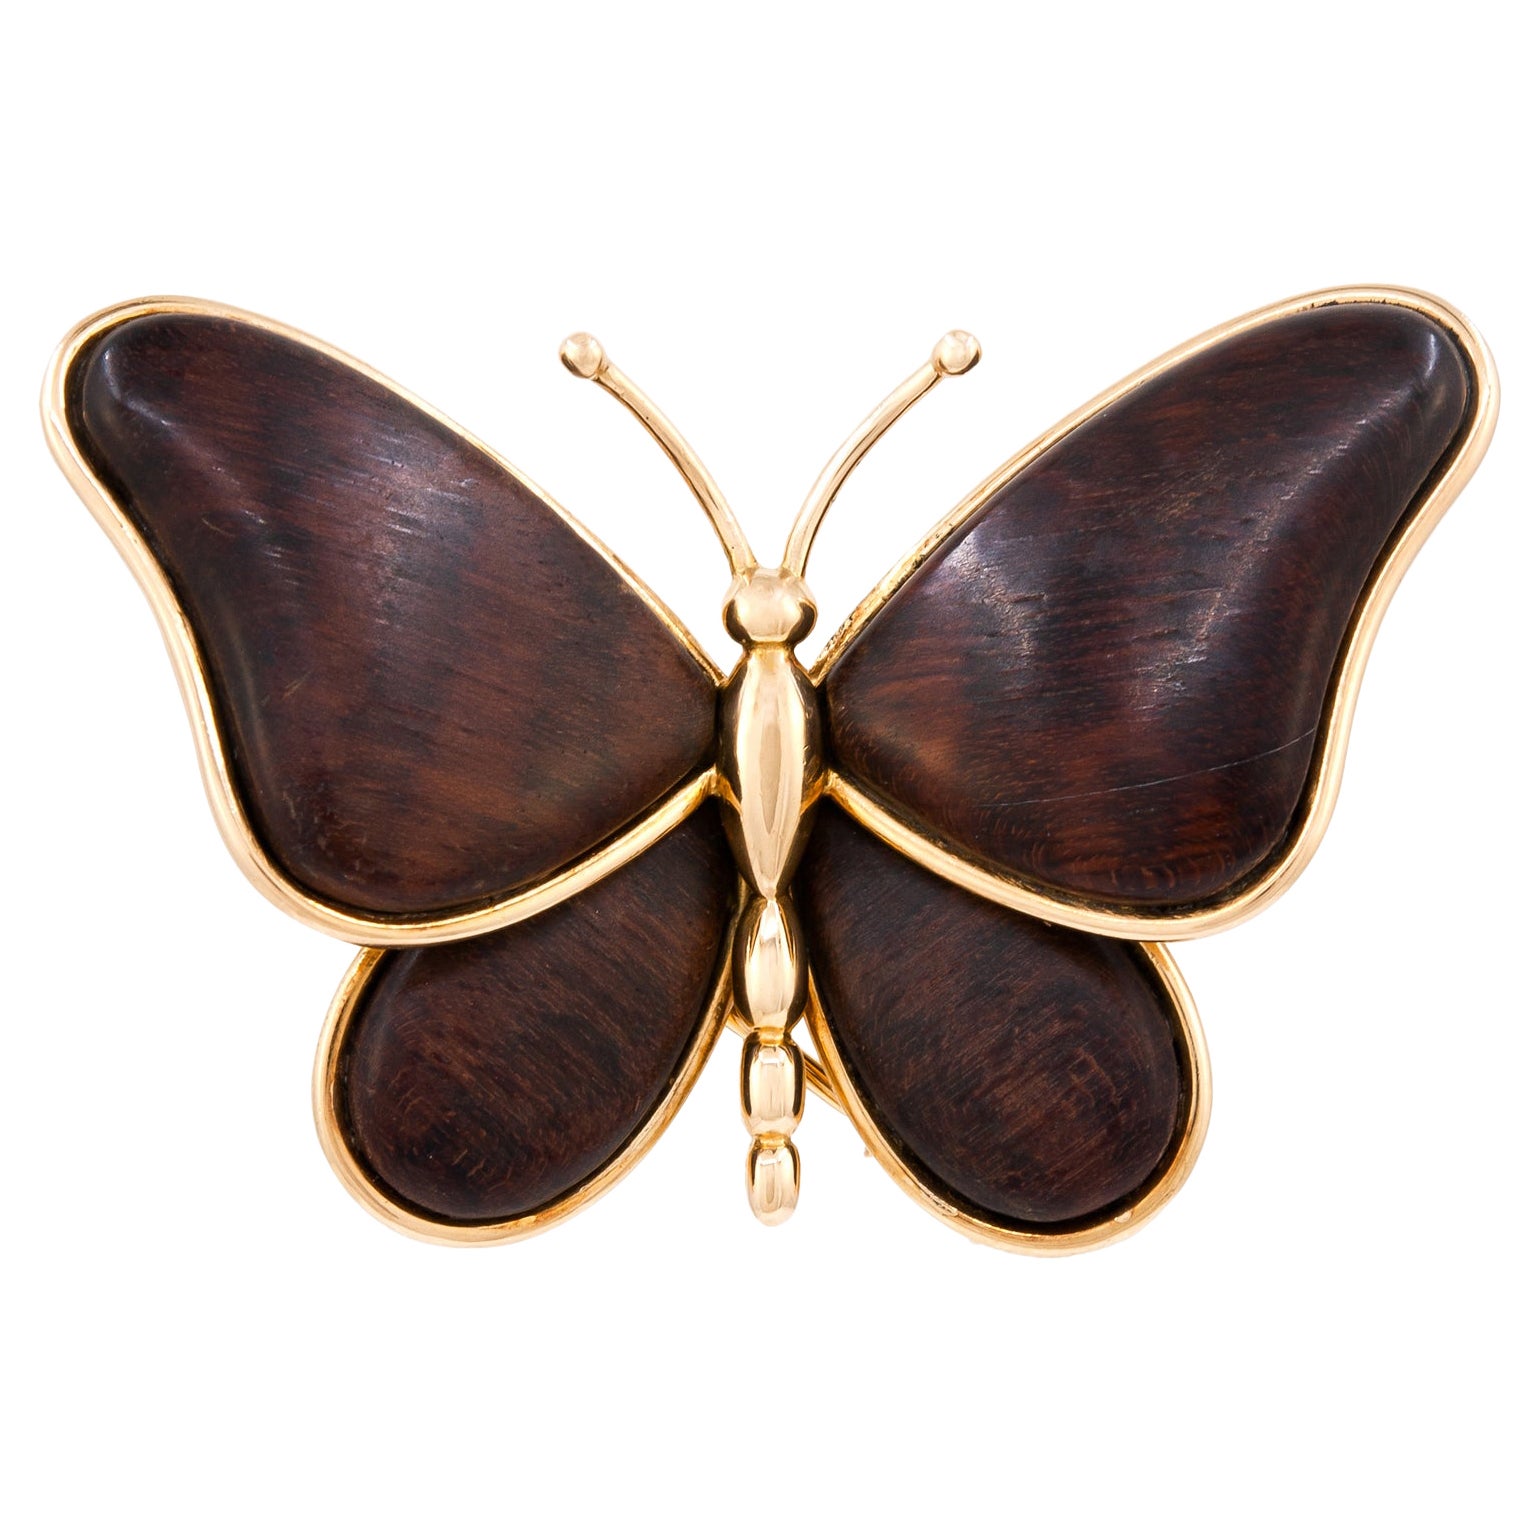 VAN CLEEF & ARPELS Wood Butterfly Brooch
An 18k yellow gold butterfly motif pin brooch/clip.
Stamped “Van Cleef & Arpels“, serial number, French hallmarks
Condition: Good - Previously owned and gently worn, with little signs of use. May show light